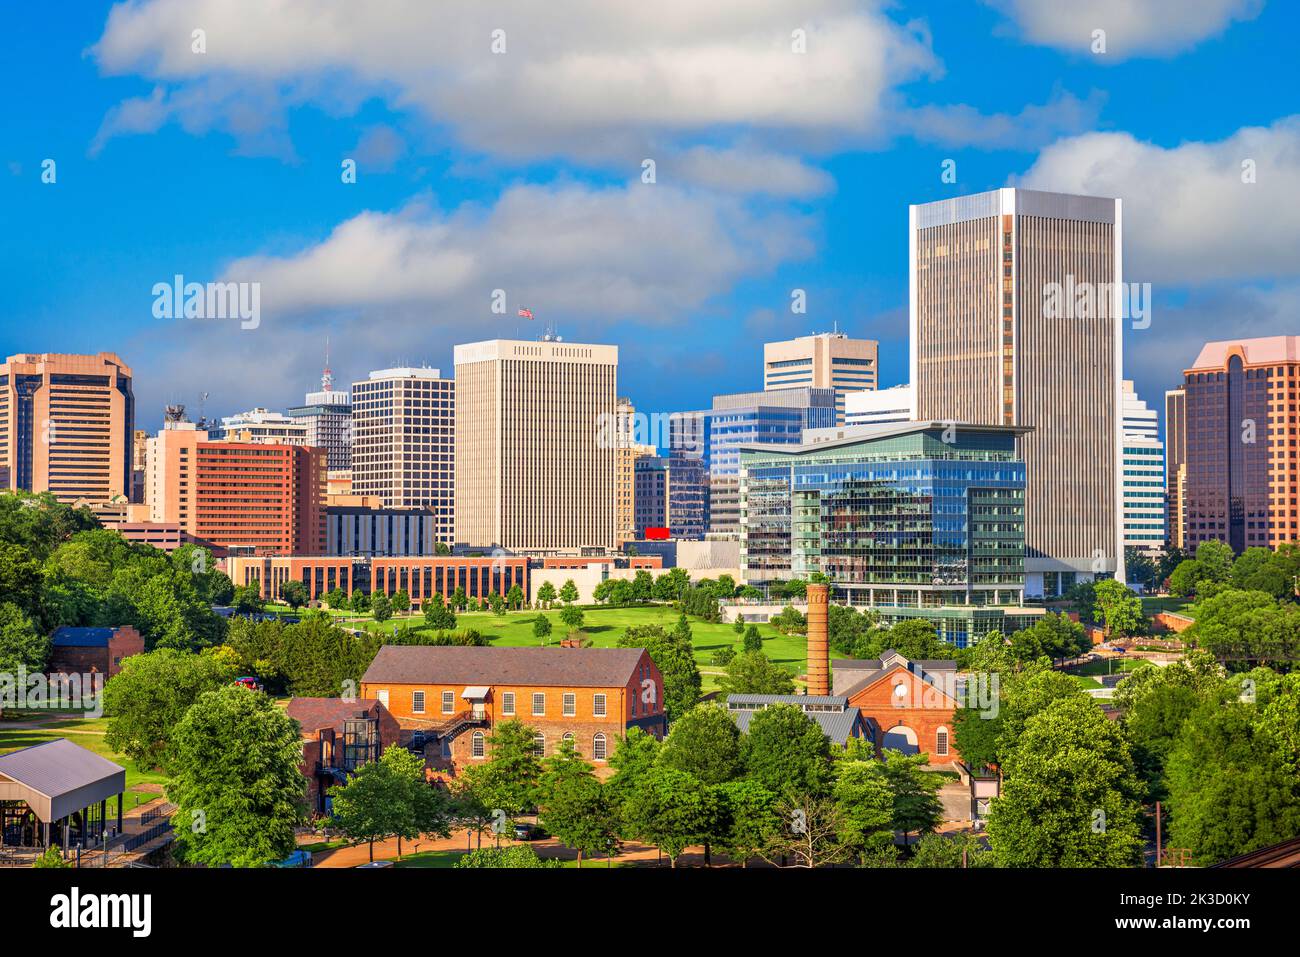 Richmond, Virginia park and skyline in the afternoon. Stock Photo